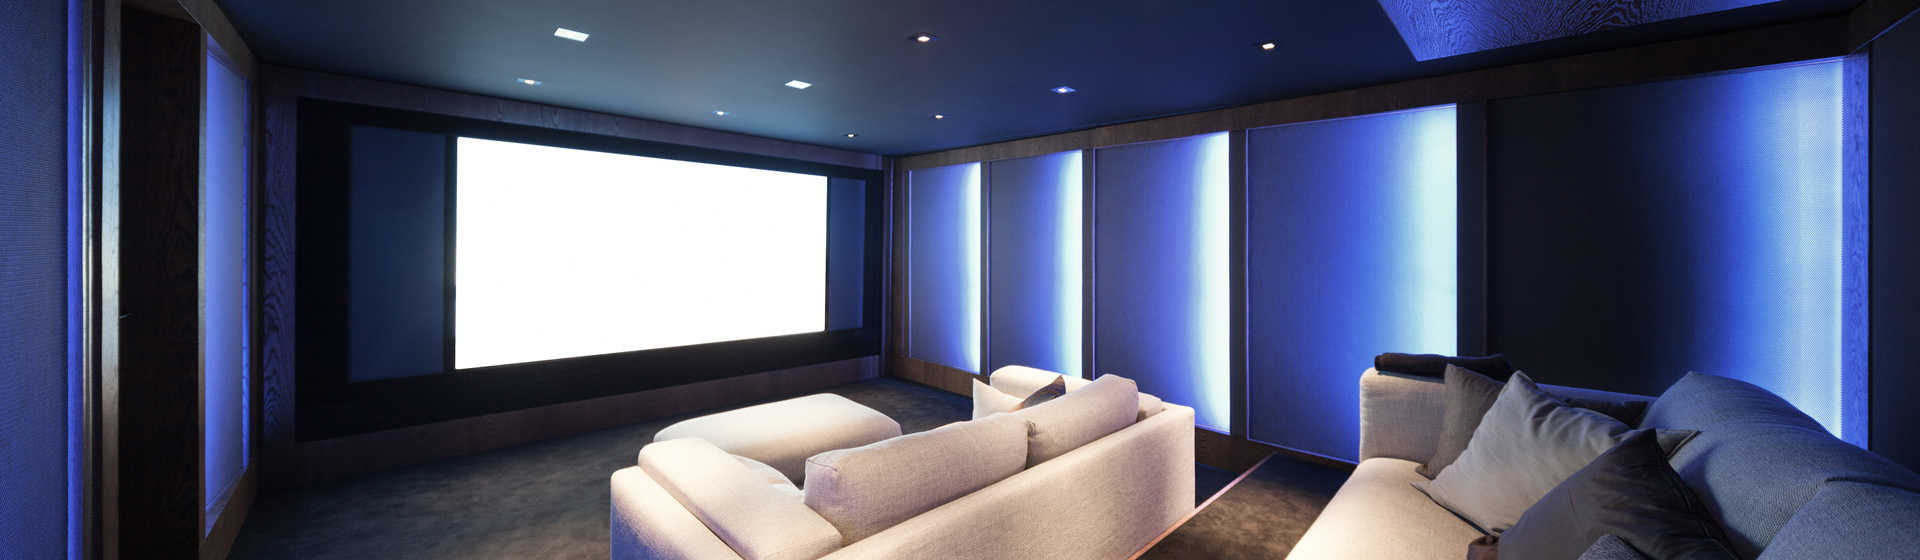 tampa's home theater and audio installation pros 